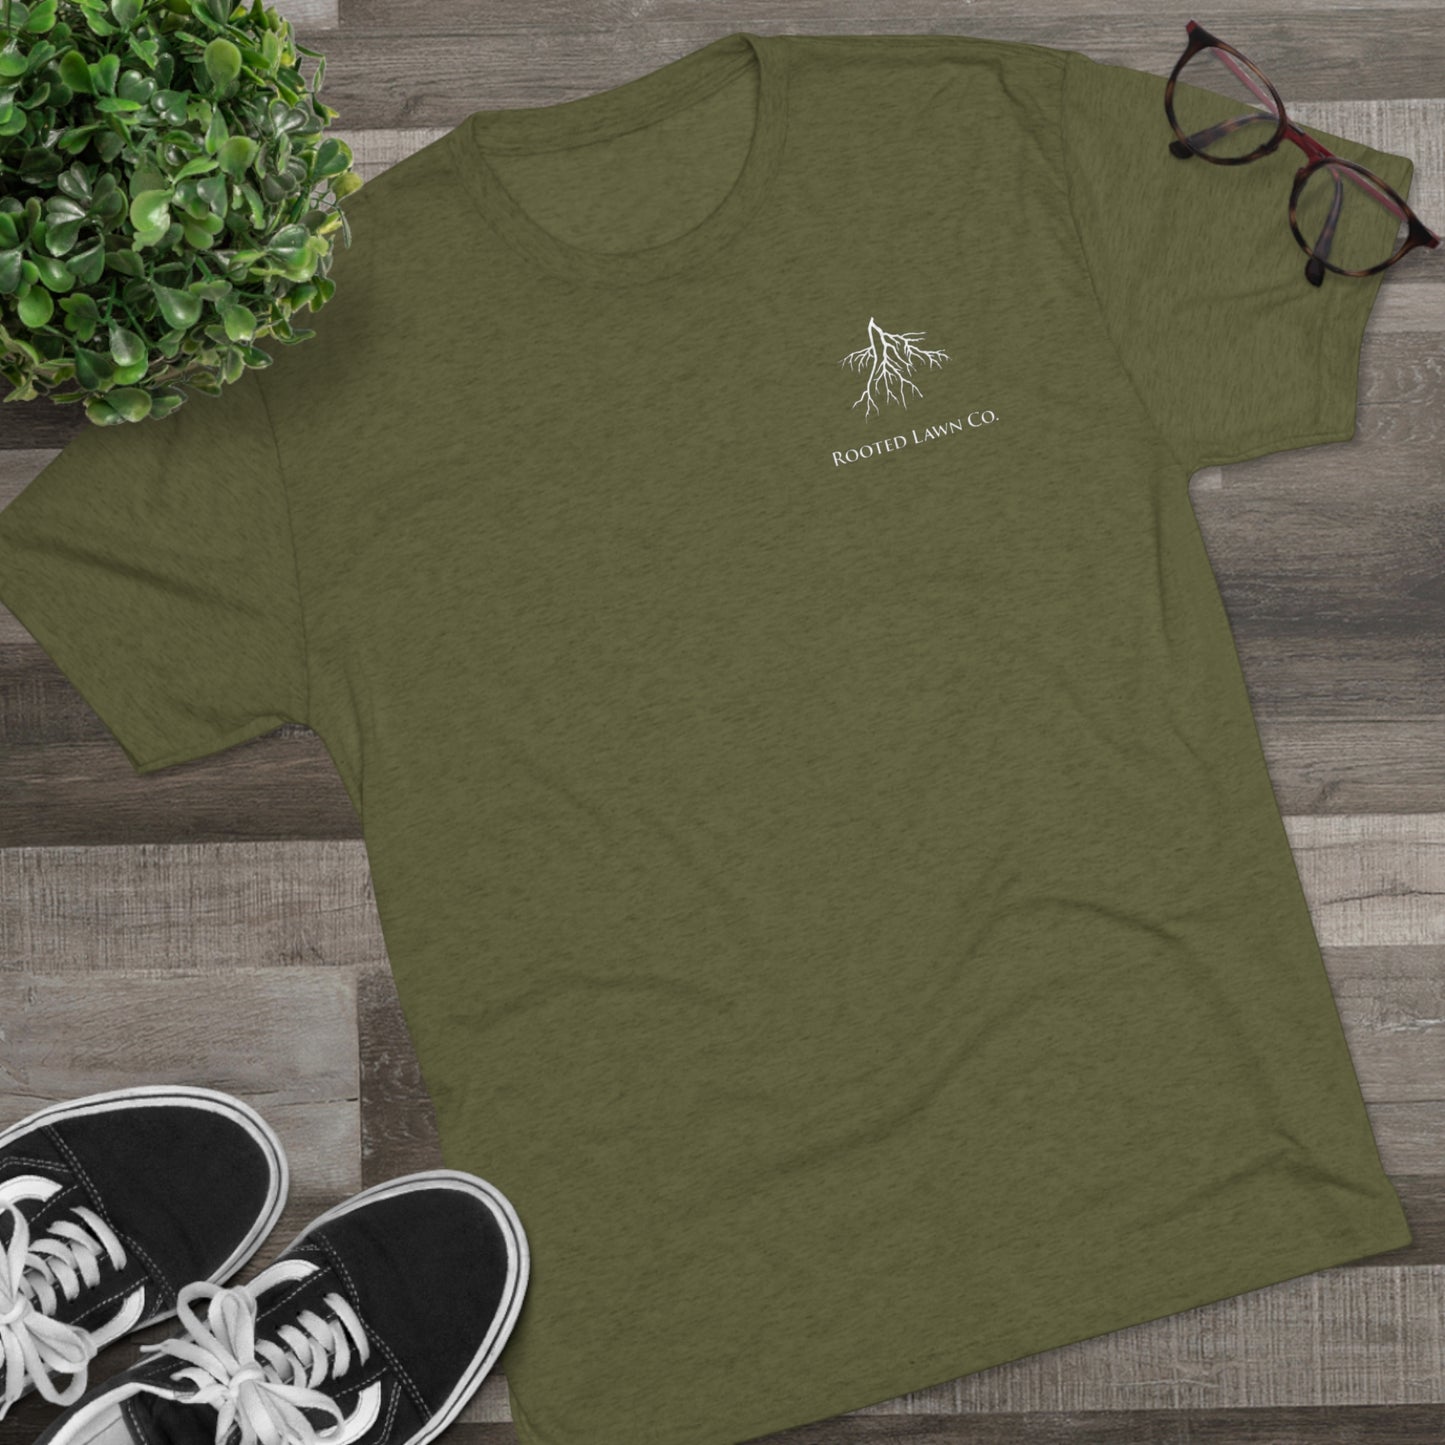 Rooted Lawn Co Tee